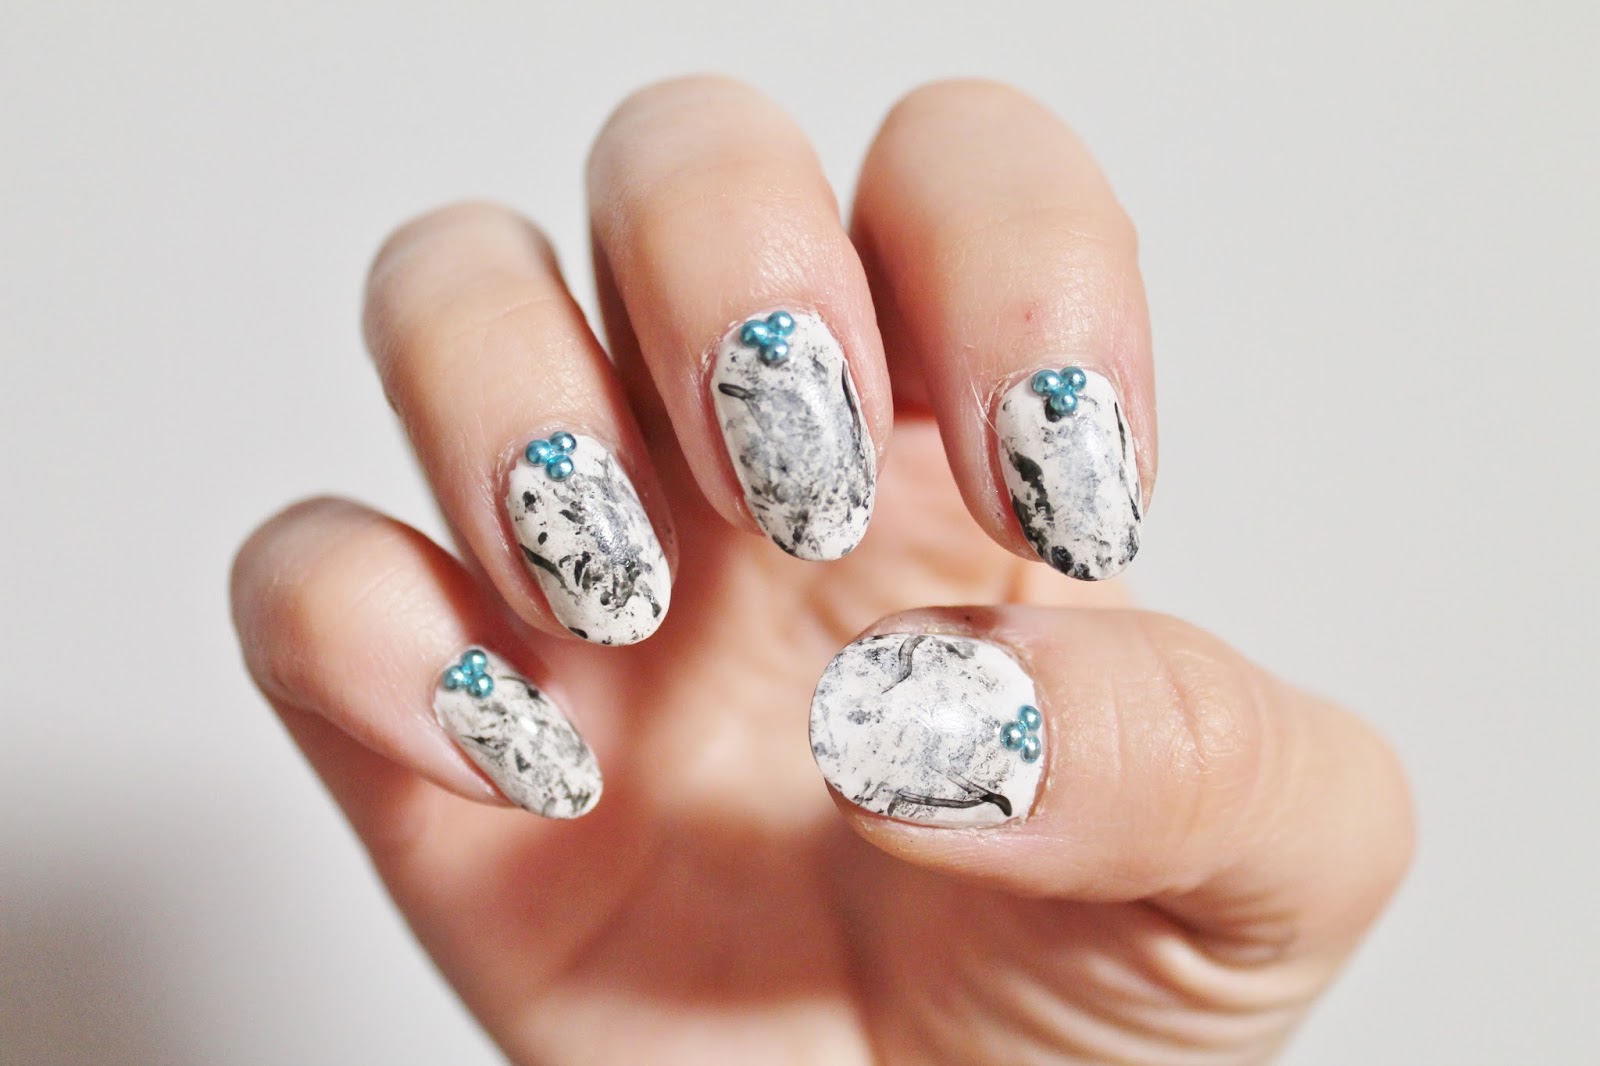 1. Marble Nail Art Designs - wide 4